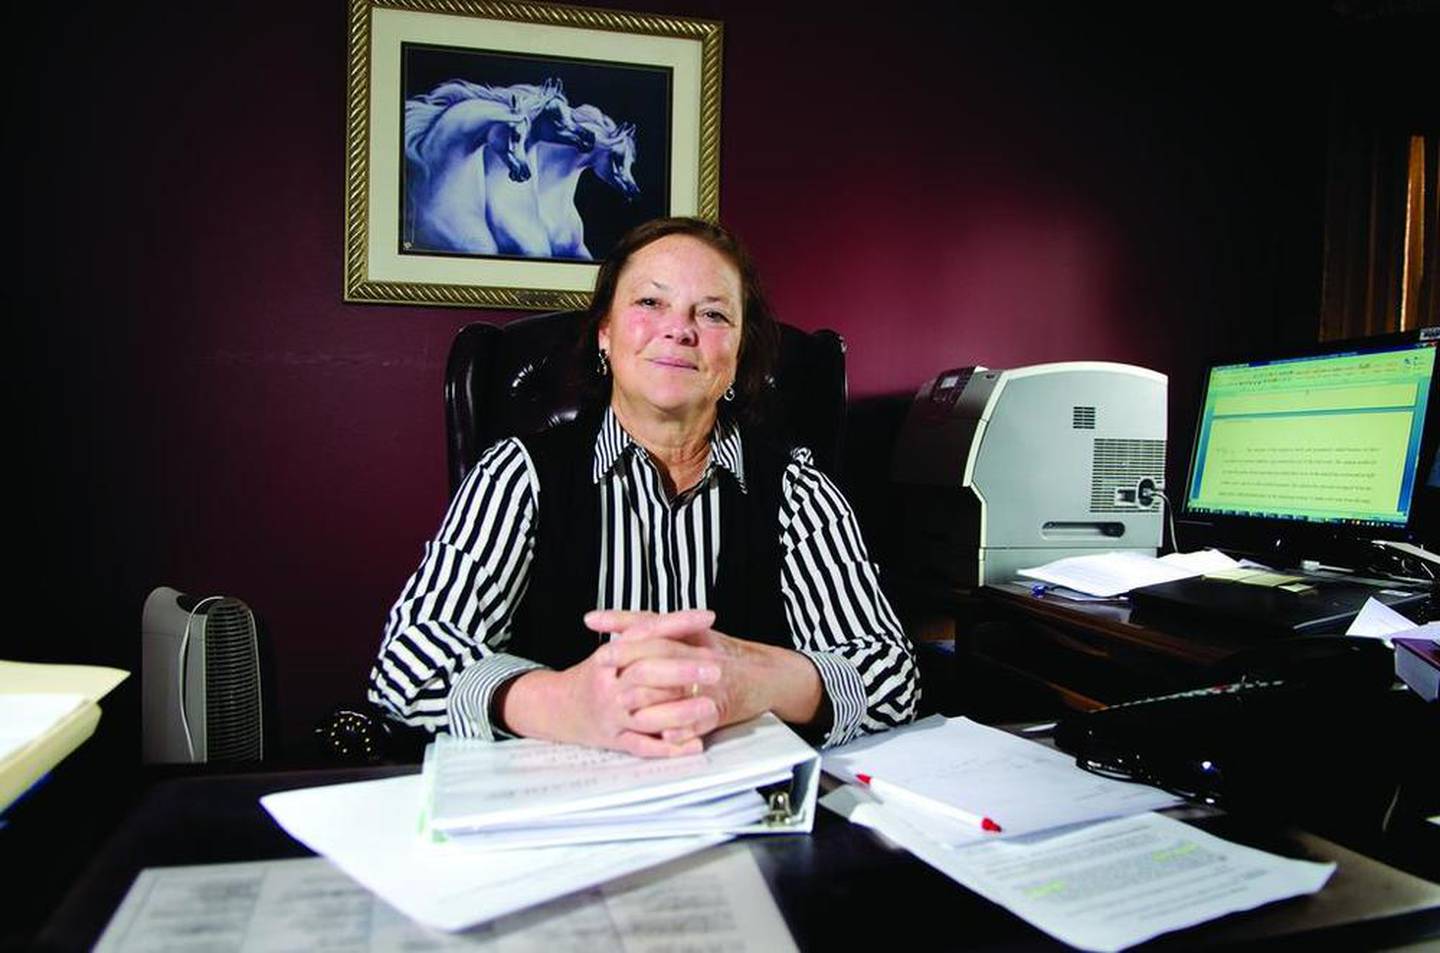 Vicki Wright was elected in November to her second 10-year term as a judge for the Third District Appellate Court, one of seven judges in the district that includes Whiteside County among its 21-county region. It’s the capstone to a career in law that’s spanned decades and built an enduring legacy of fairness, something she first got a taste for at her father’s diner.